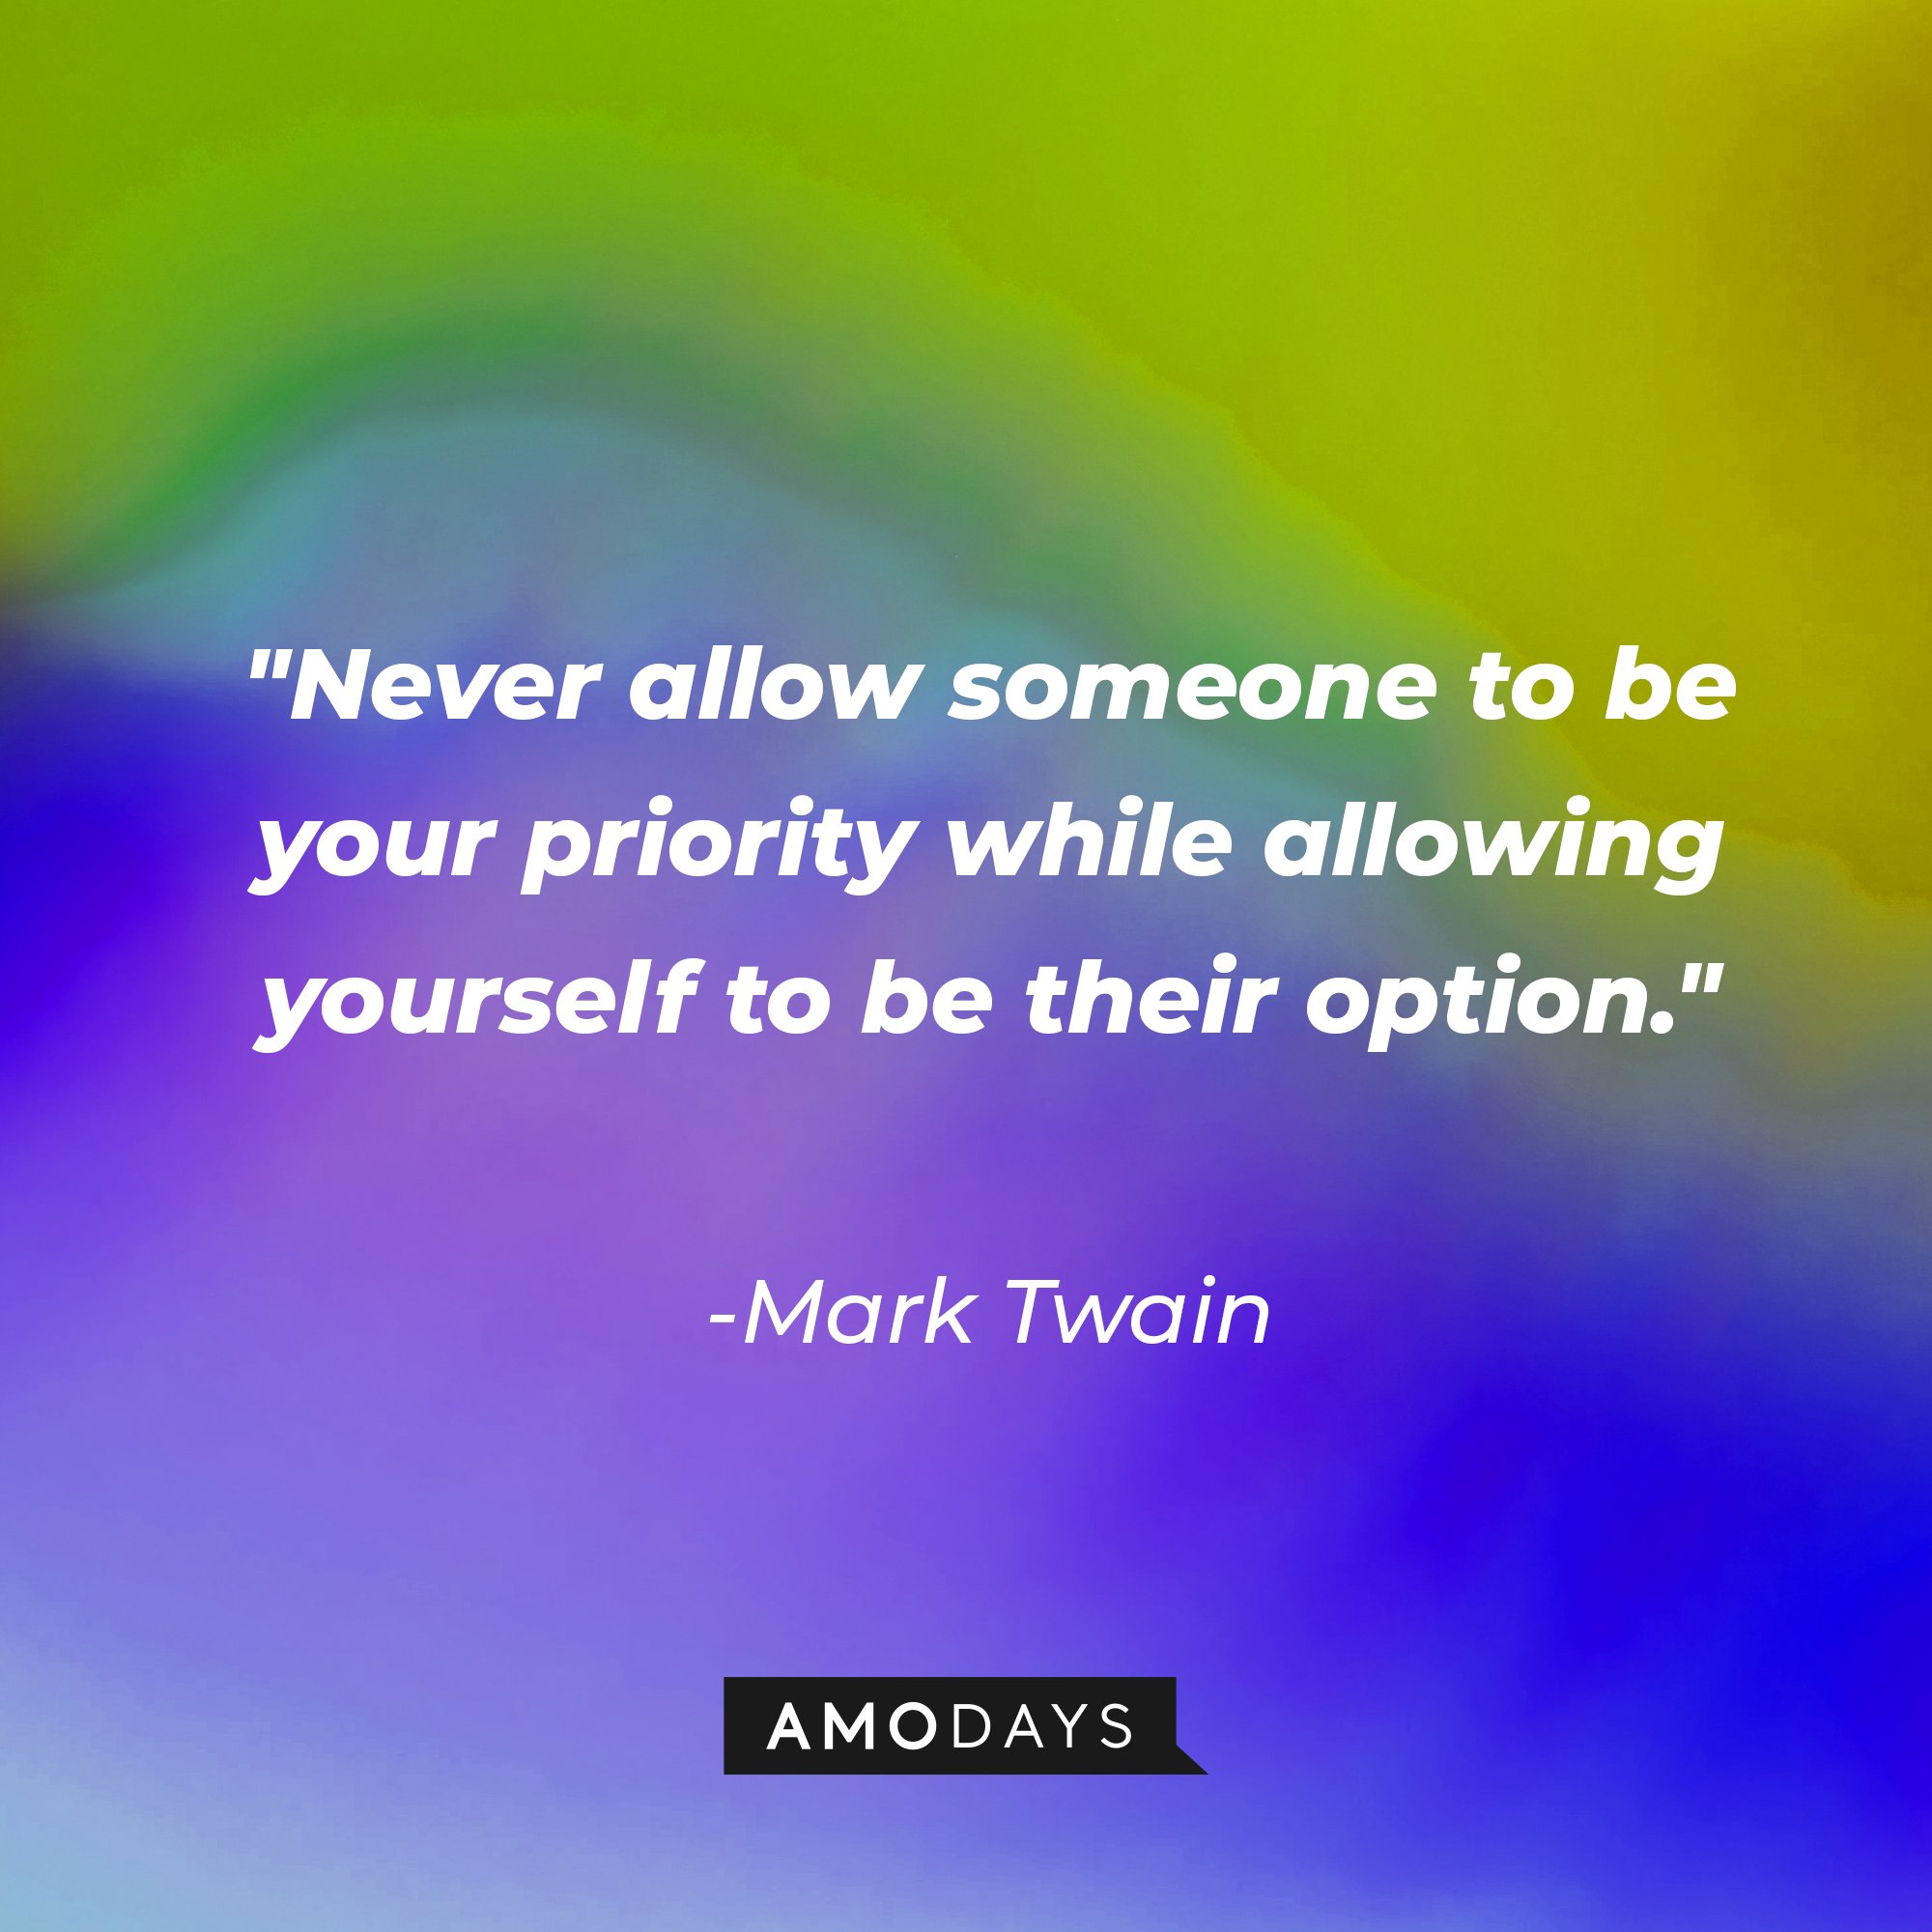 Mark Twain's quote: "Never allow someone to be your priority while allowing yourself to be their option." | Image: AmoDays